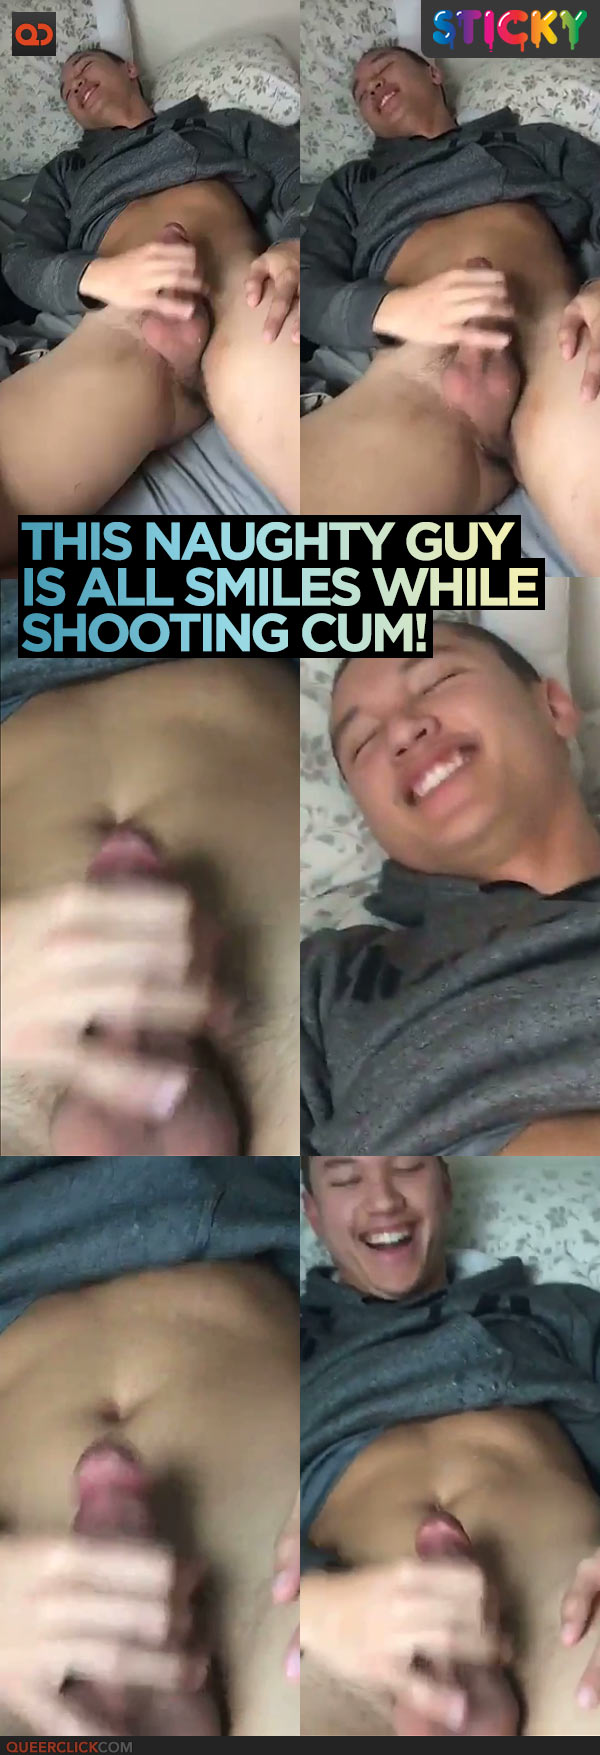 This Naughty Guy Is All Smiles While Shooting Cum!